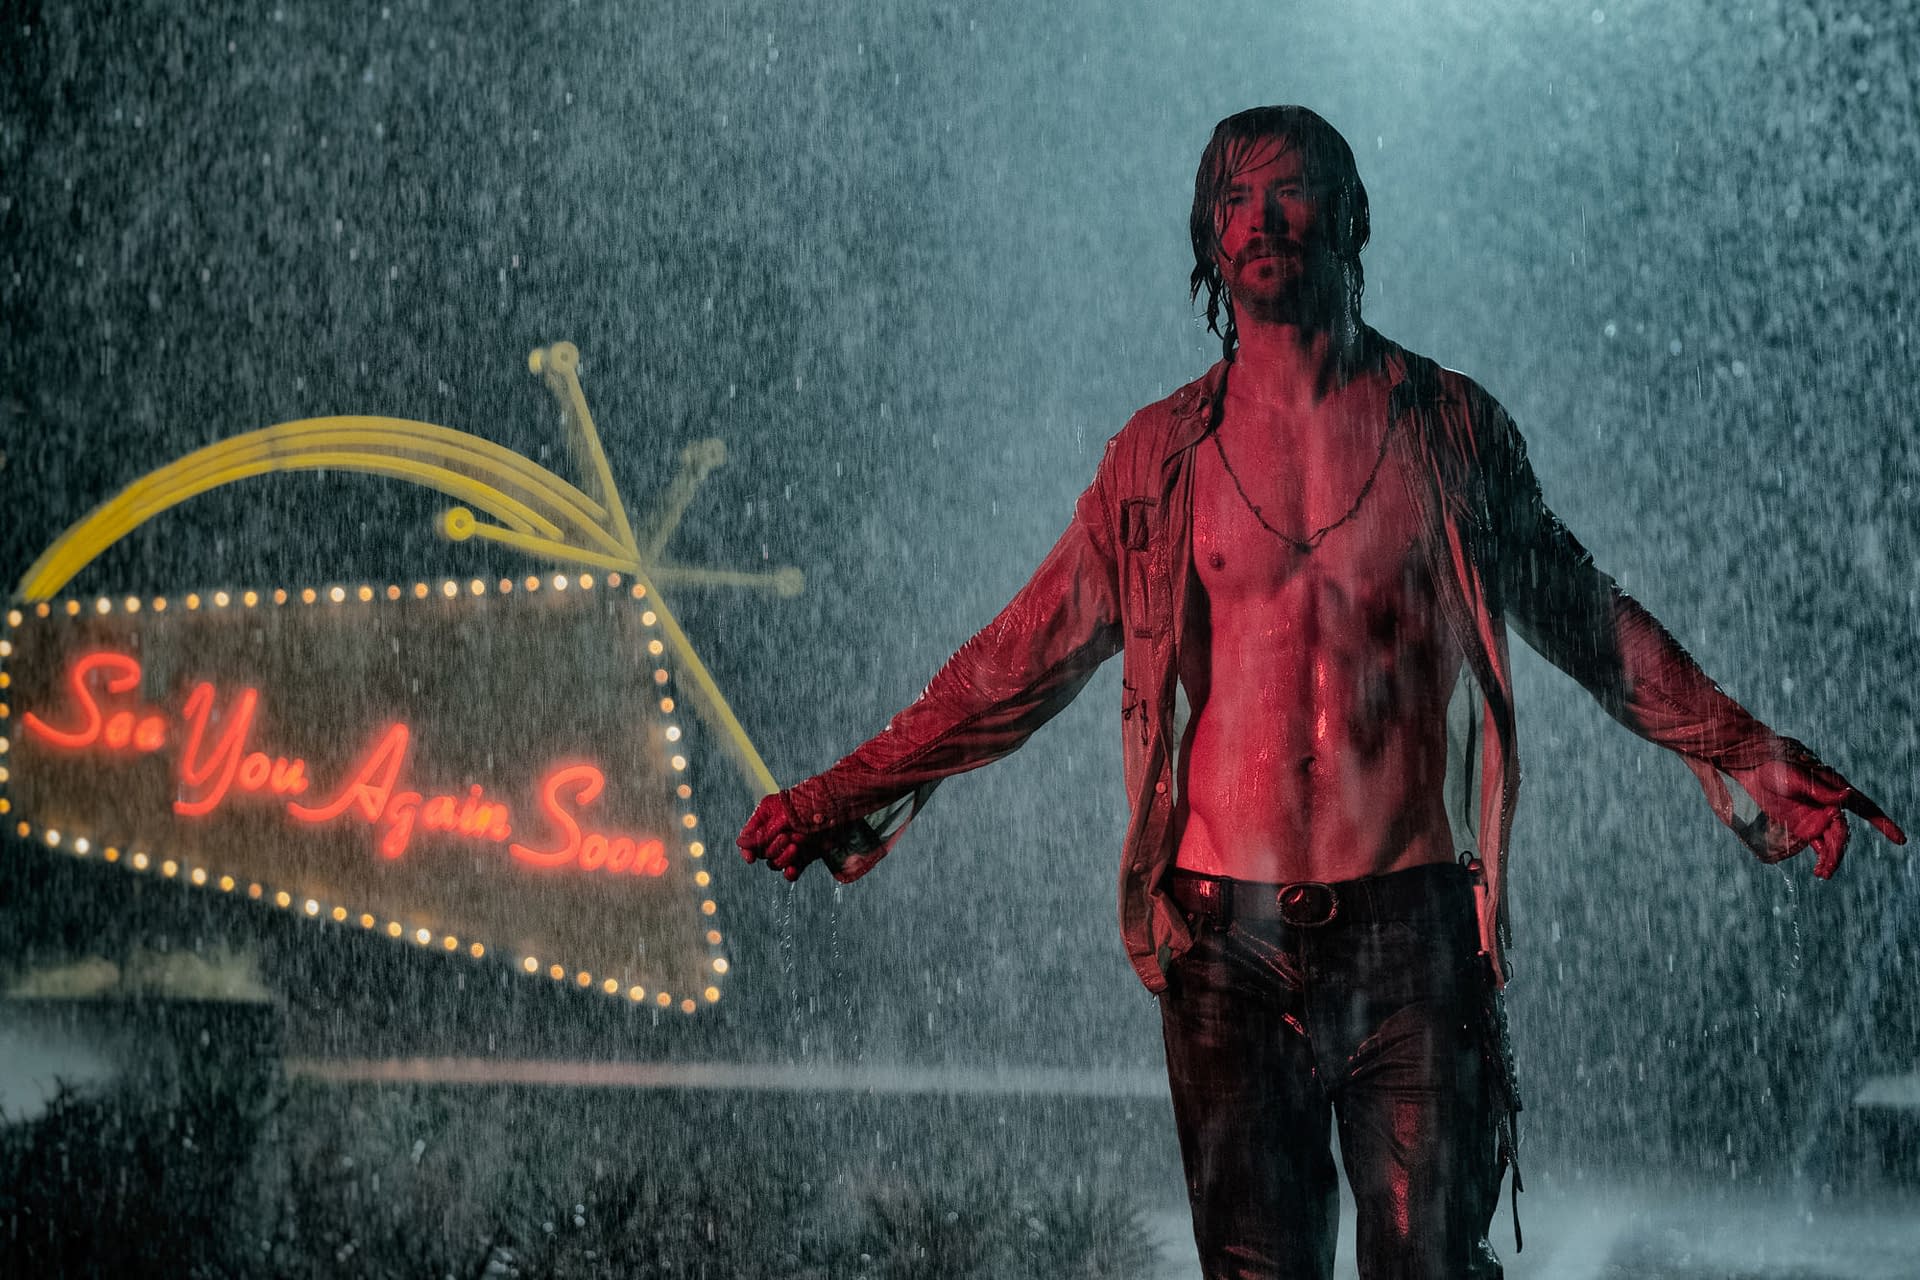 First Trailer, Images, and Poster for Bad Times at the El Royale